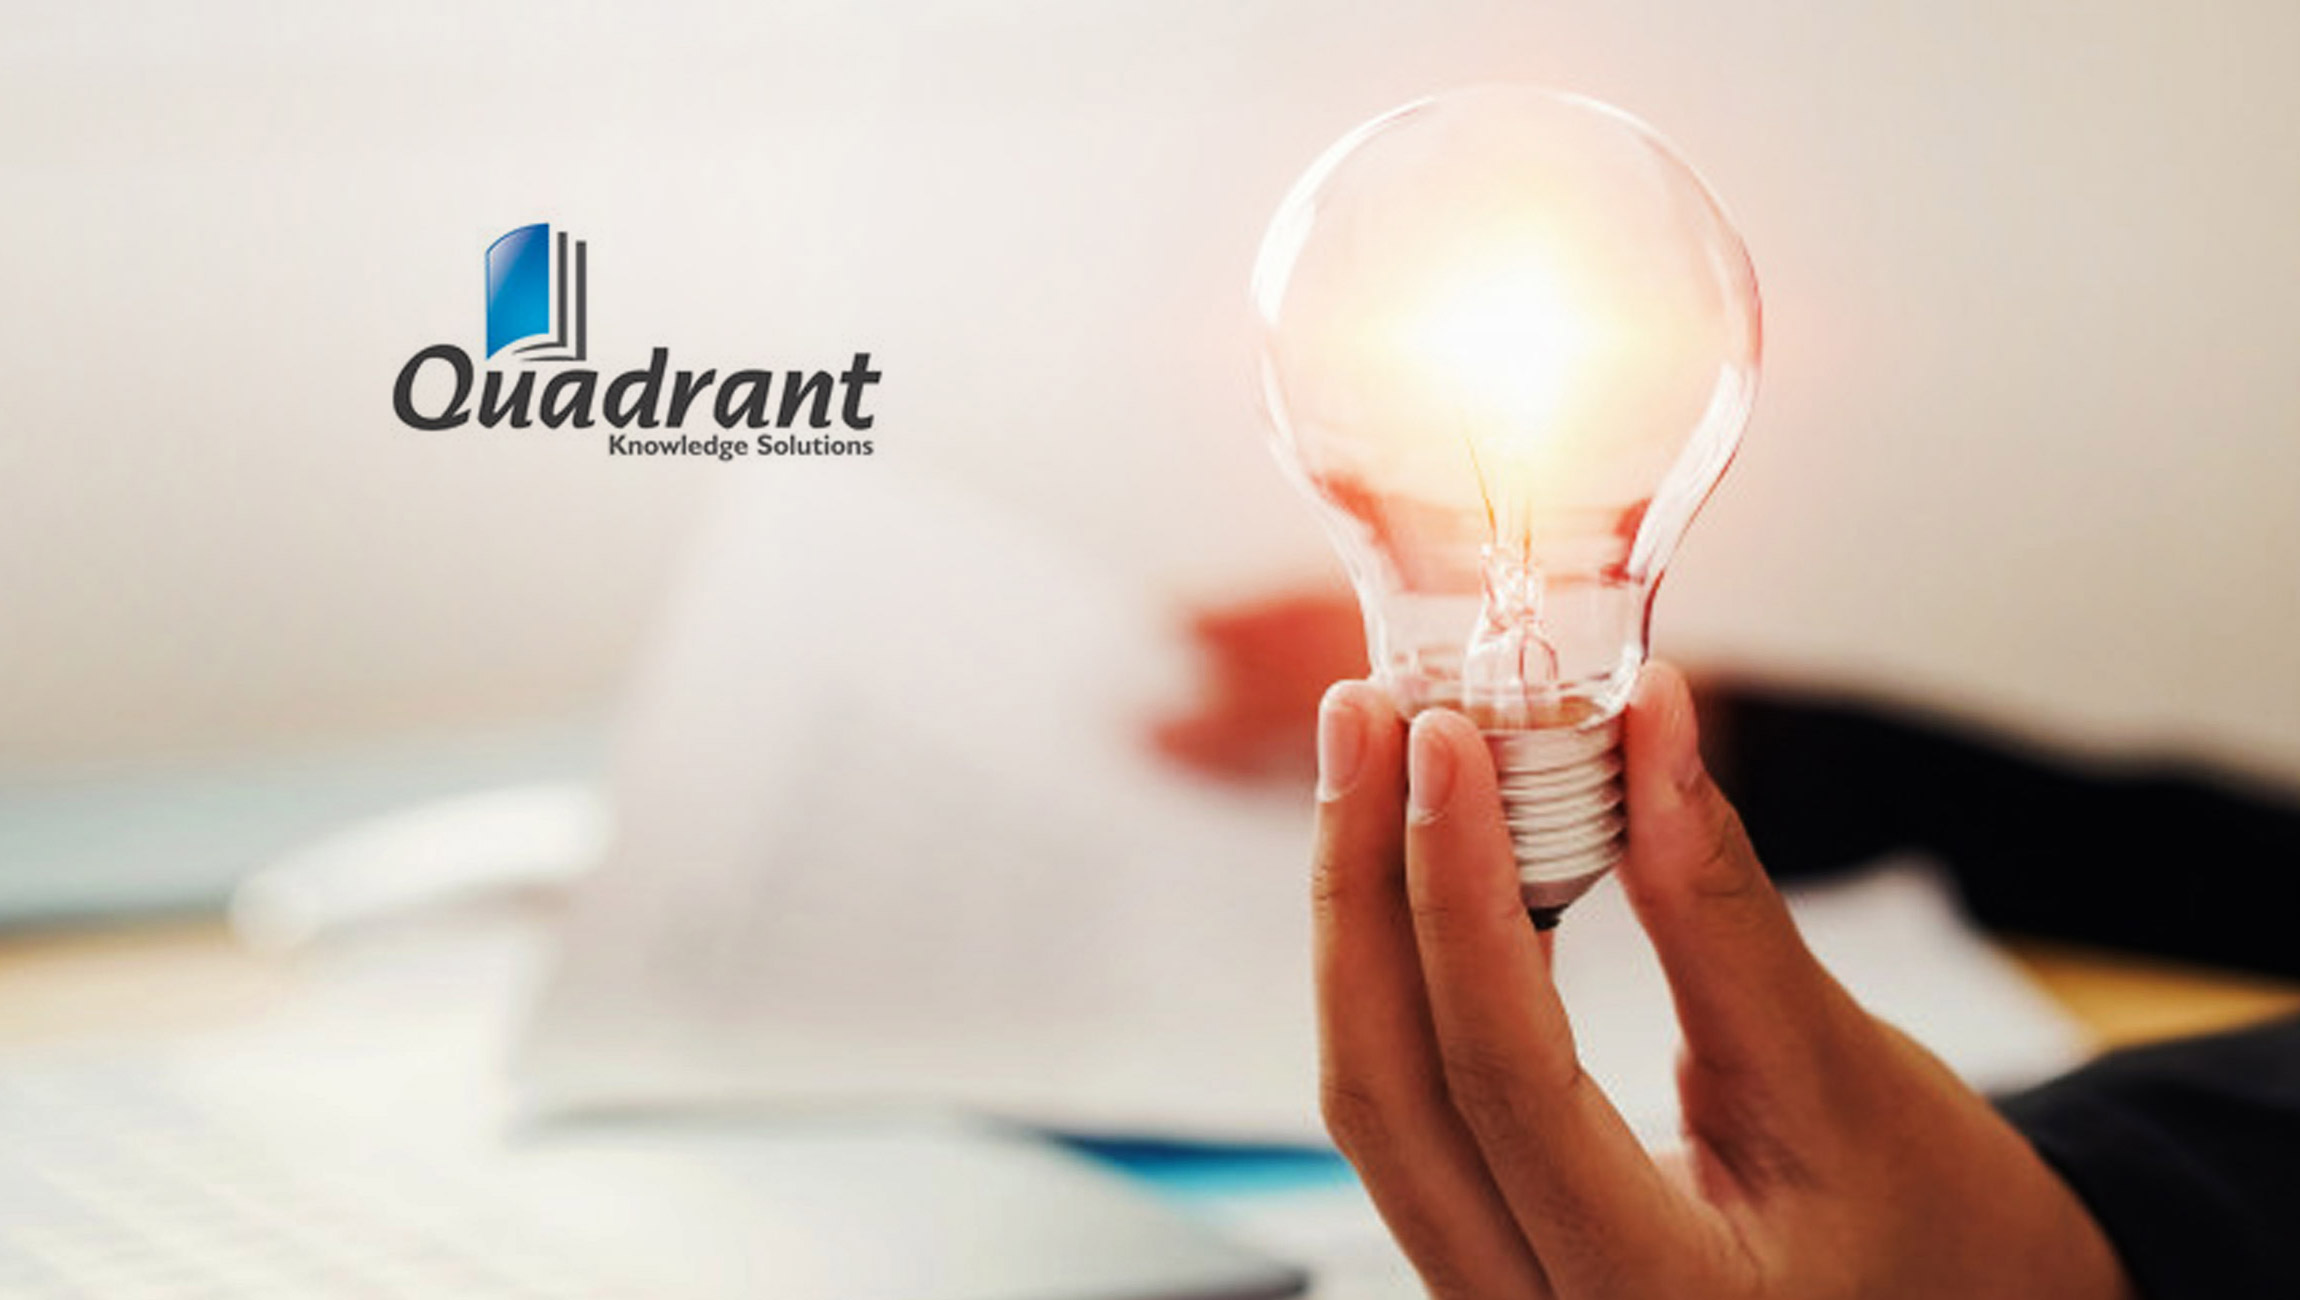 HCL Software Positioned as the Leader in the 2022 SPARK MatrixTM for Unified Endpoint Management (UEM) by Quadrant Knowledge Solutions